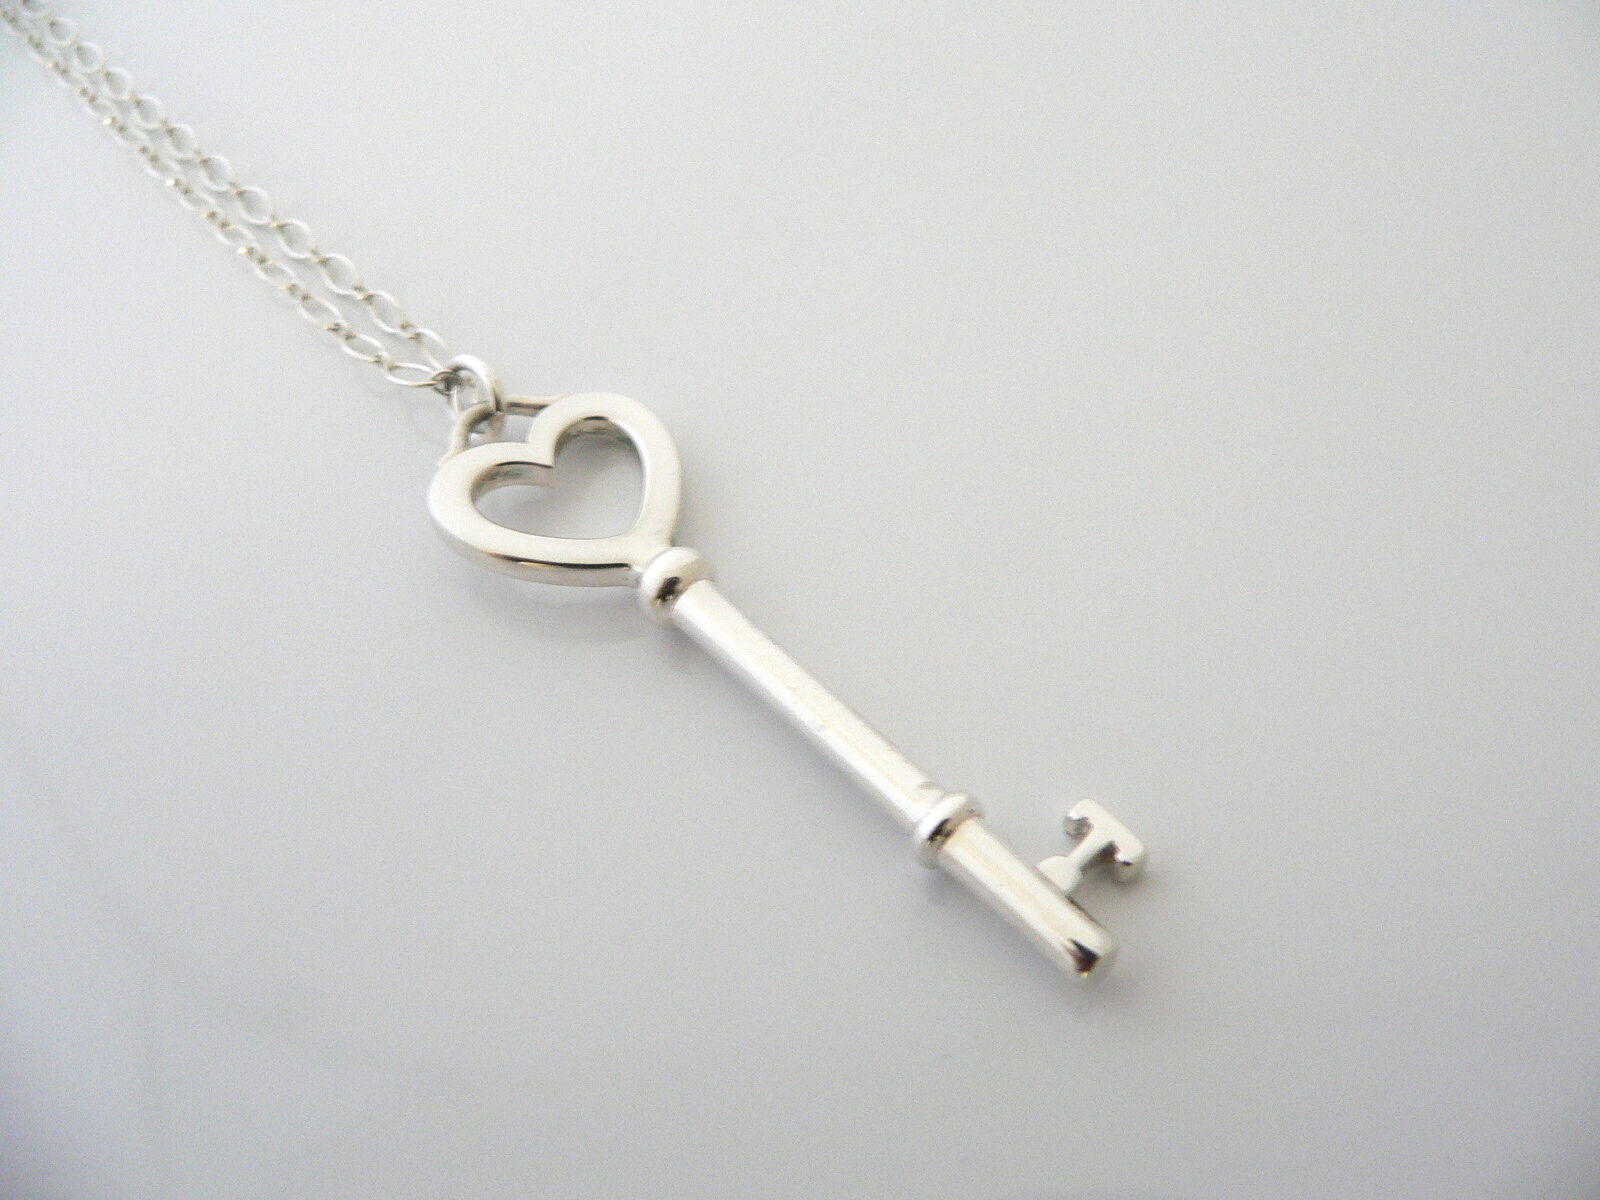 Tiffany Co Silver Large Heart Key Necklace Pendant 18 Inch Chain Gift Love